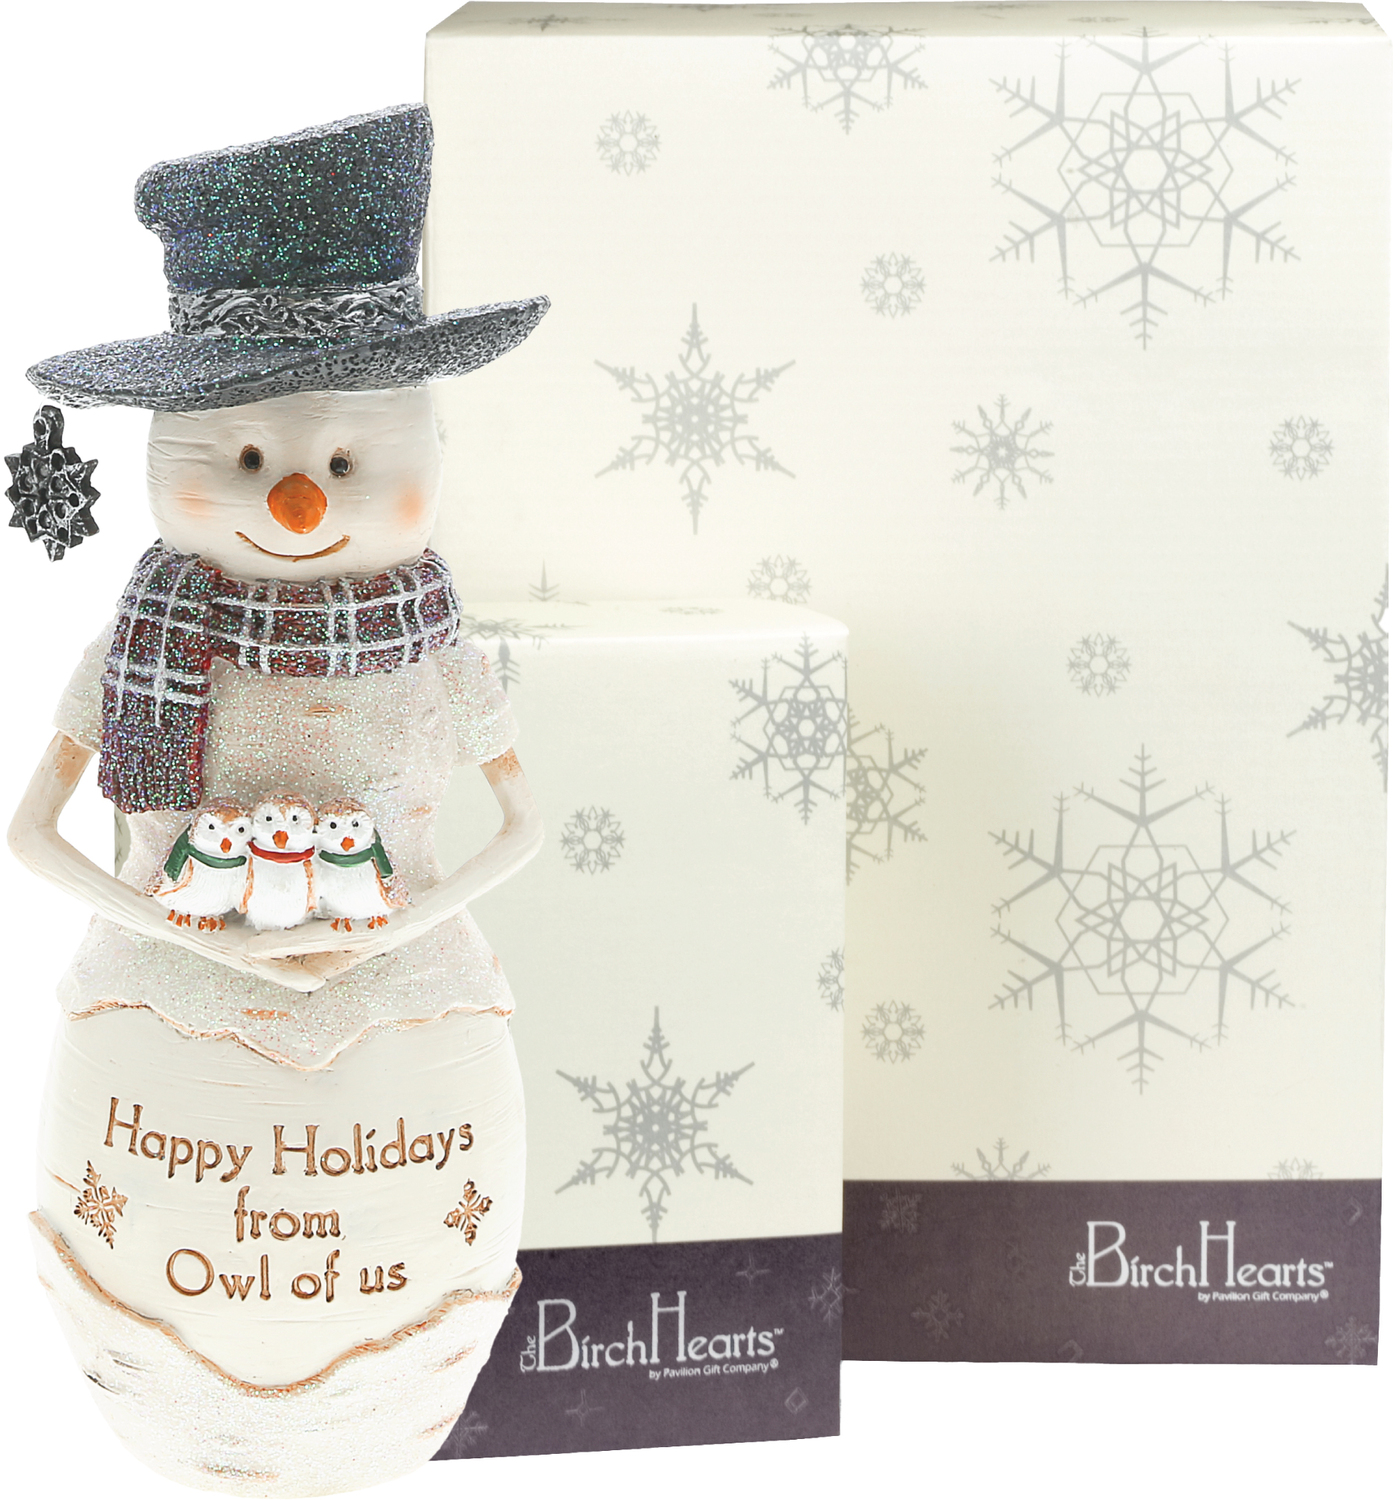 Owl Holidays by The Birchhearts - Owl Holidays - 6" Snowman Holding Owls